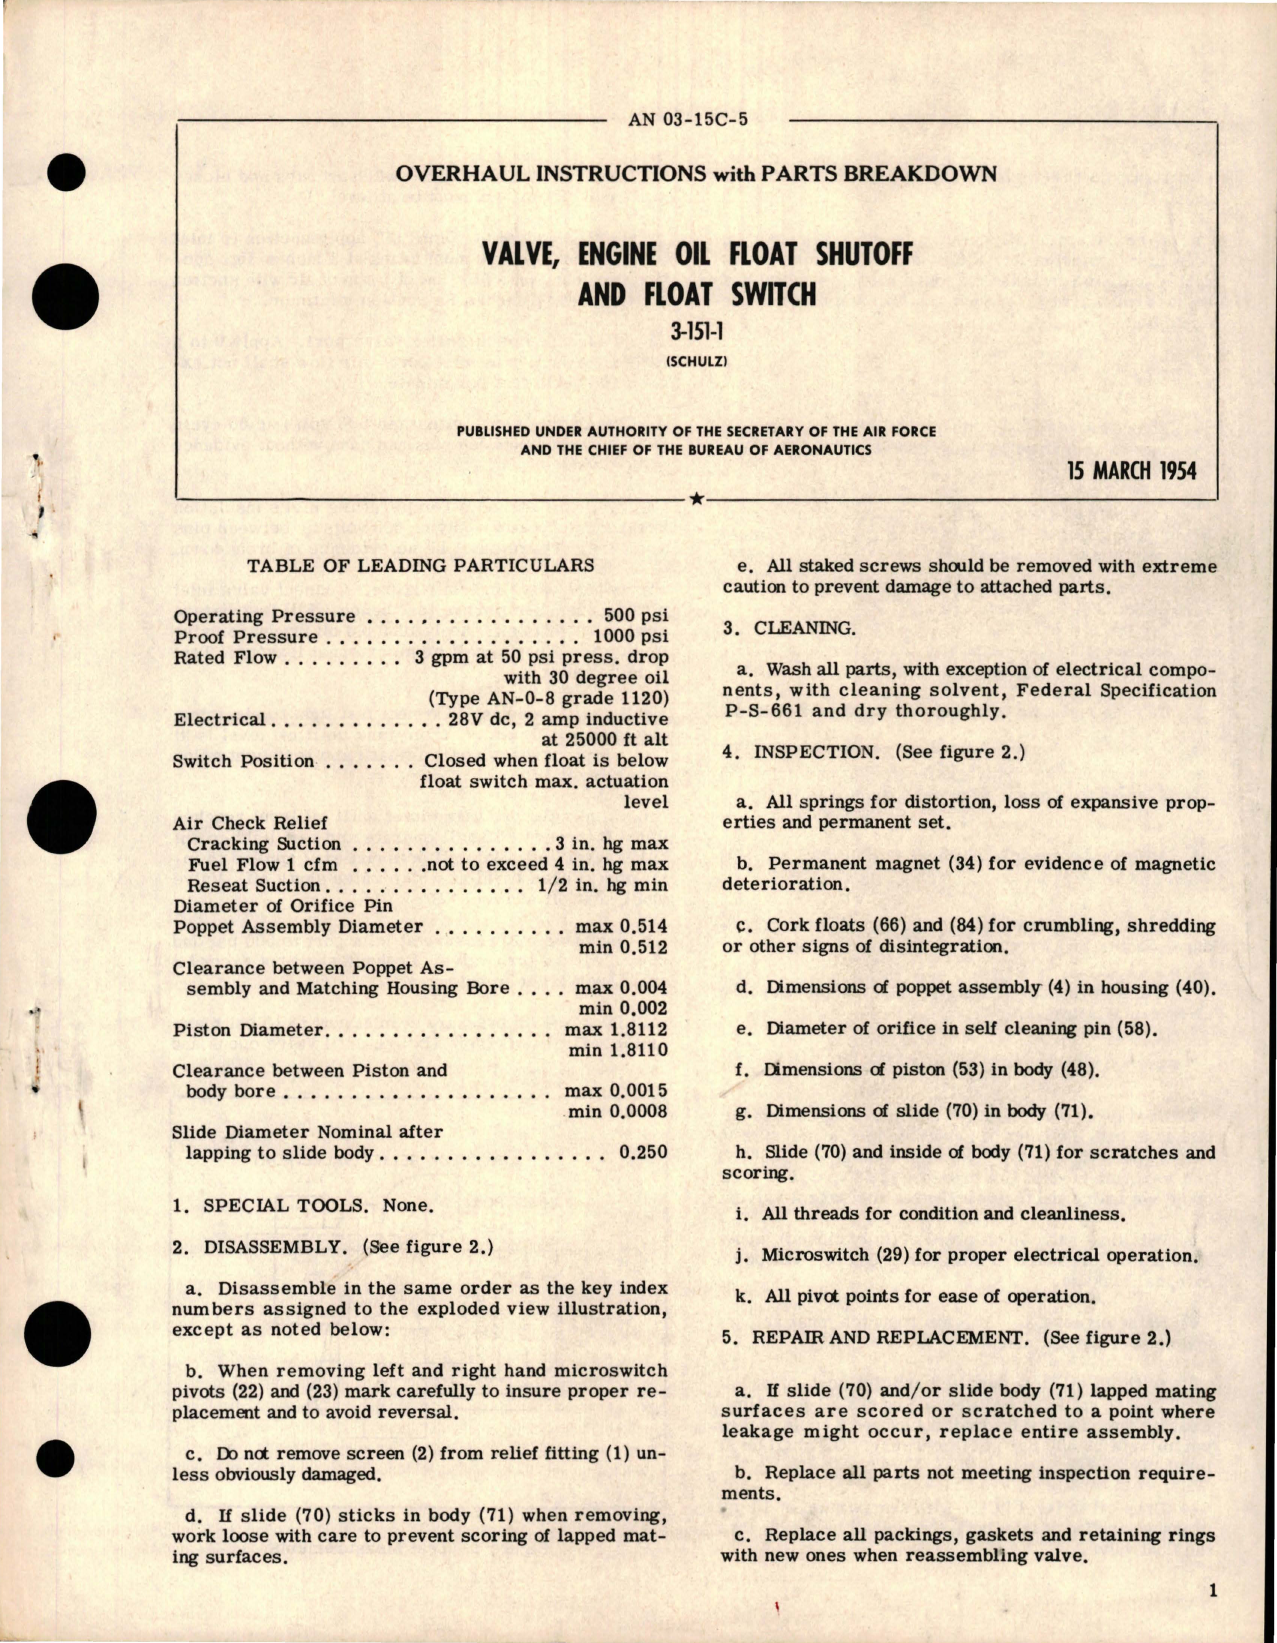 Sample page 1 from AirCorps Library document: Overhaul Instructions with Parts Breakdown for Engine Oil Float Shutoff and Float Switch Valve - 3-151-1